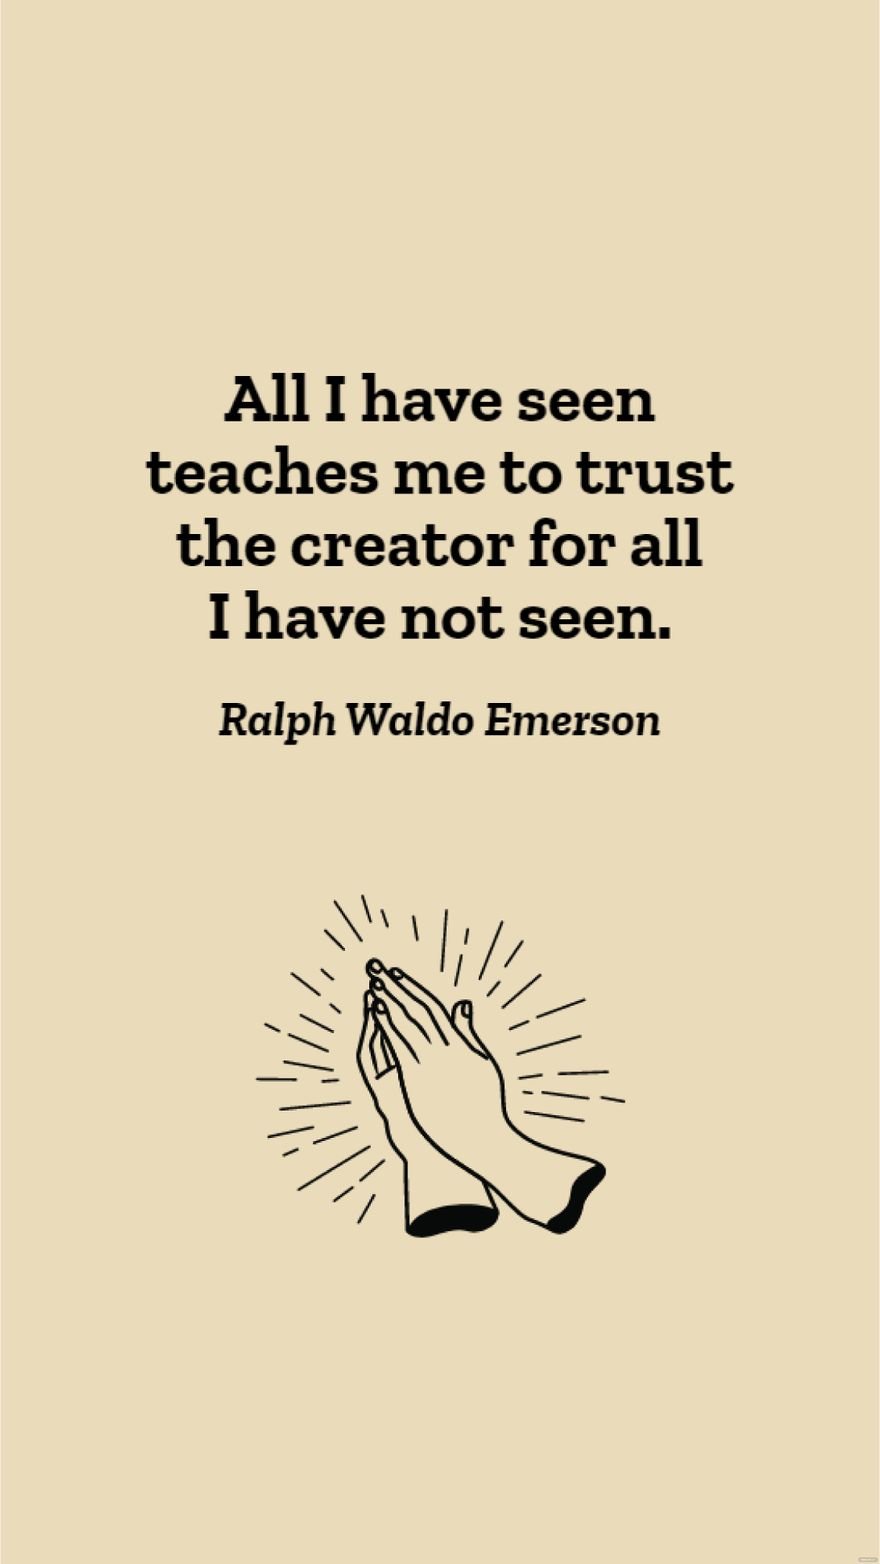 Free Ralph Waldo Emerson - All I have seen teaches me to trust the creator for all I have not seen. in JPG